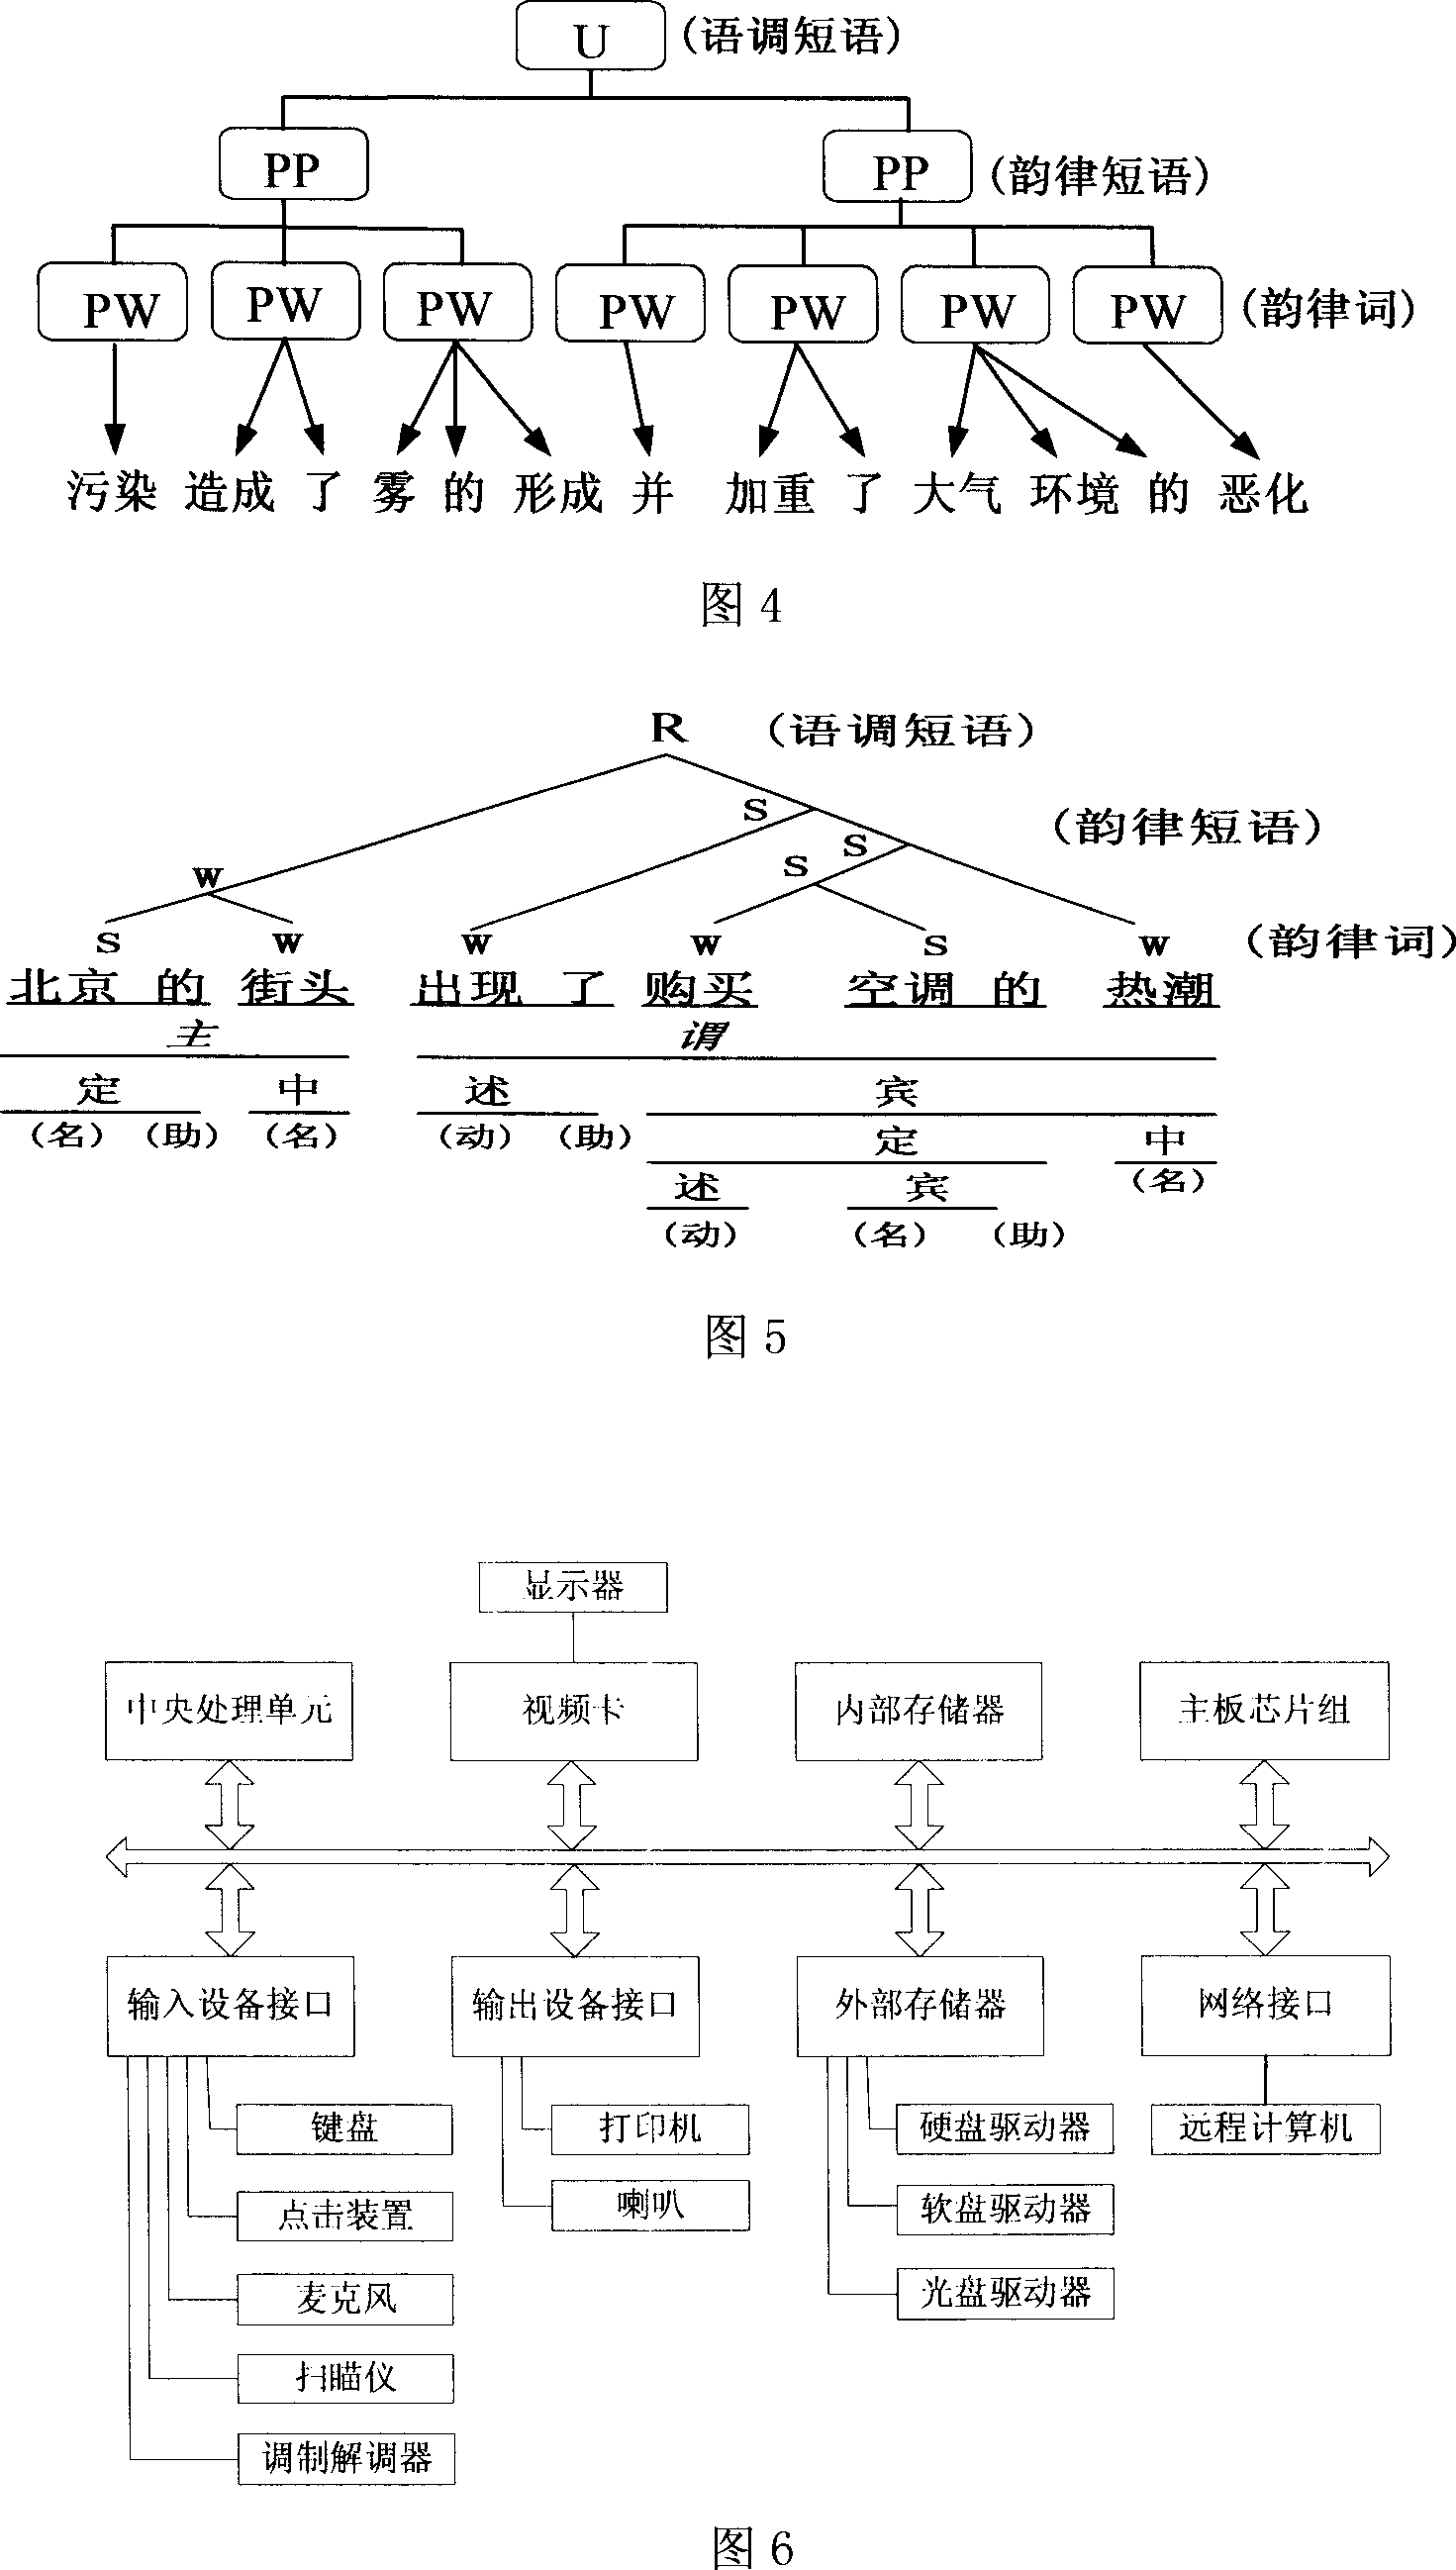 Speech synthetic text processing method based on rhythm structure